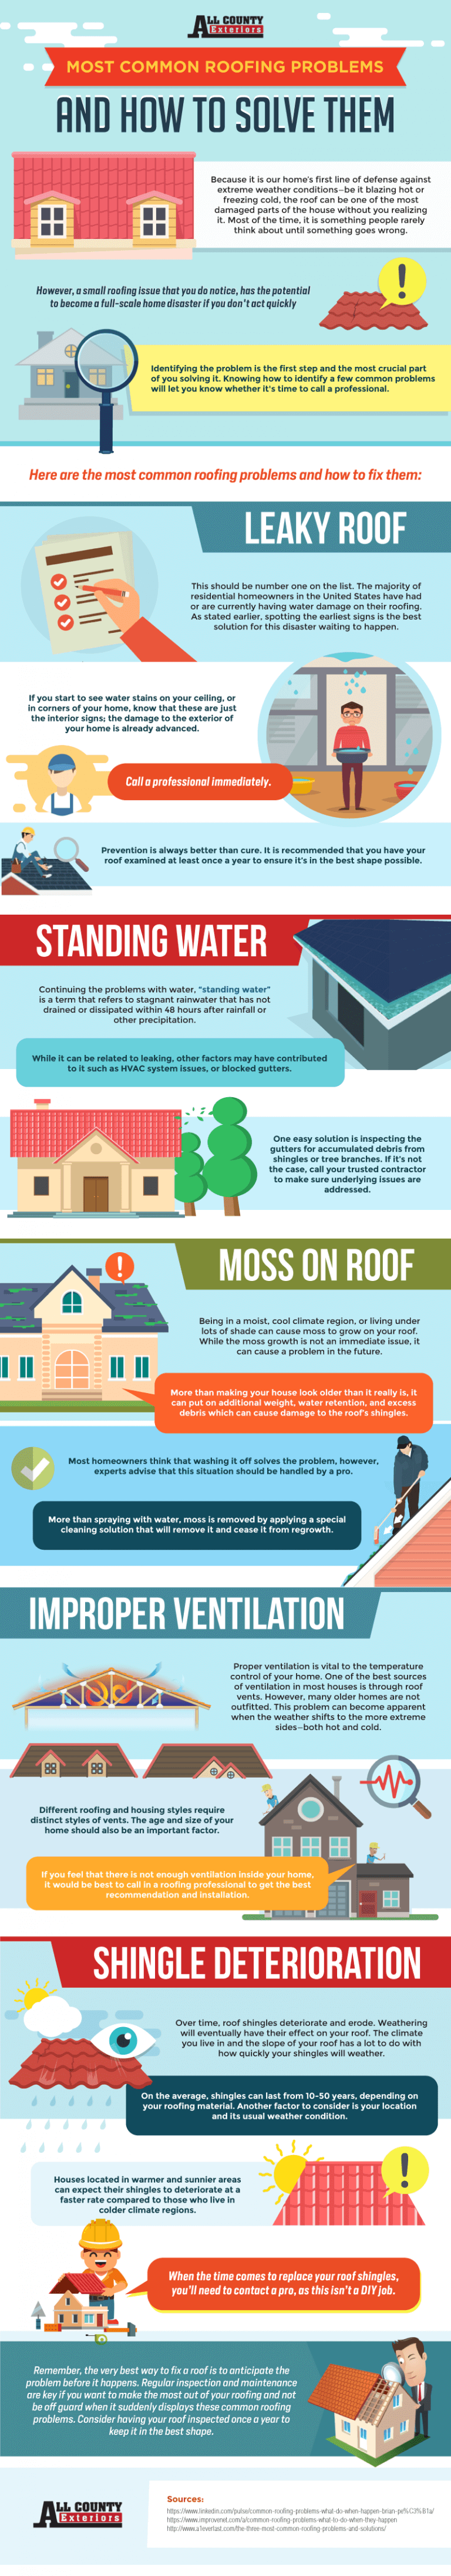 Common-Roofing-Problems-and-How-to-Solve-Them